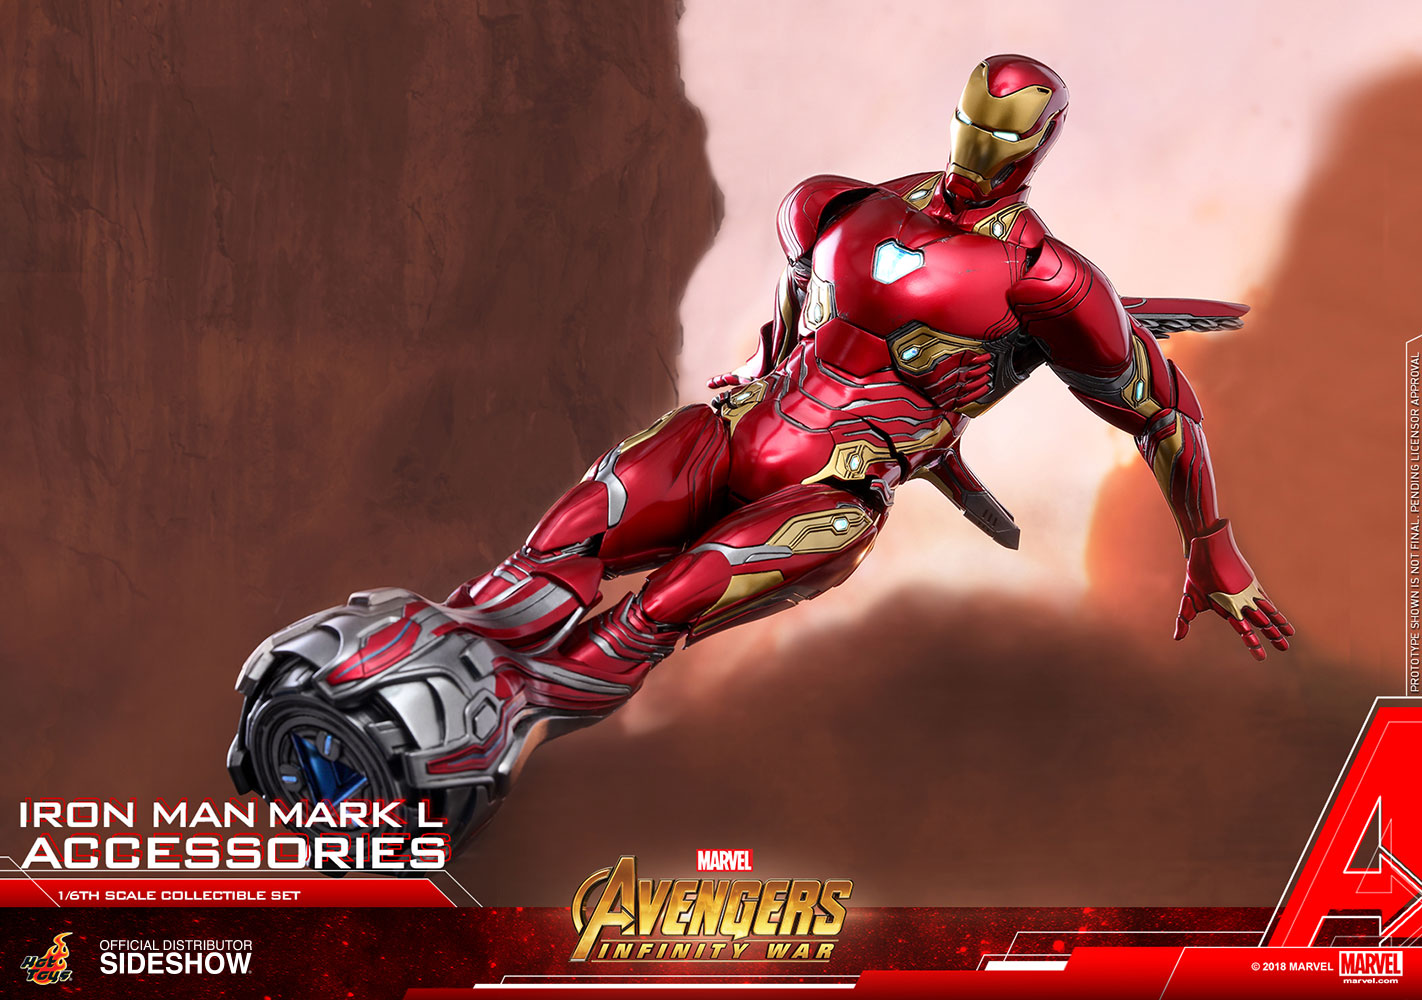 Marvel Iron Man Mark L Accessories Special Edition Set